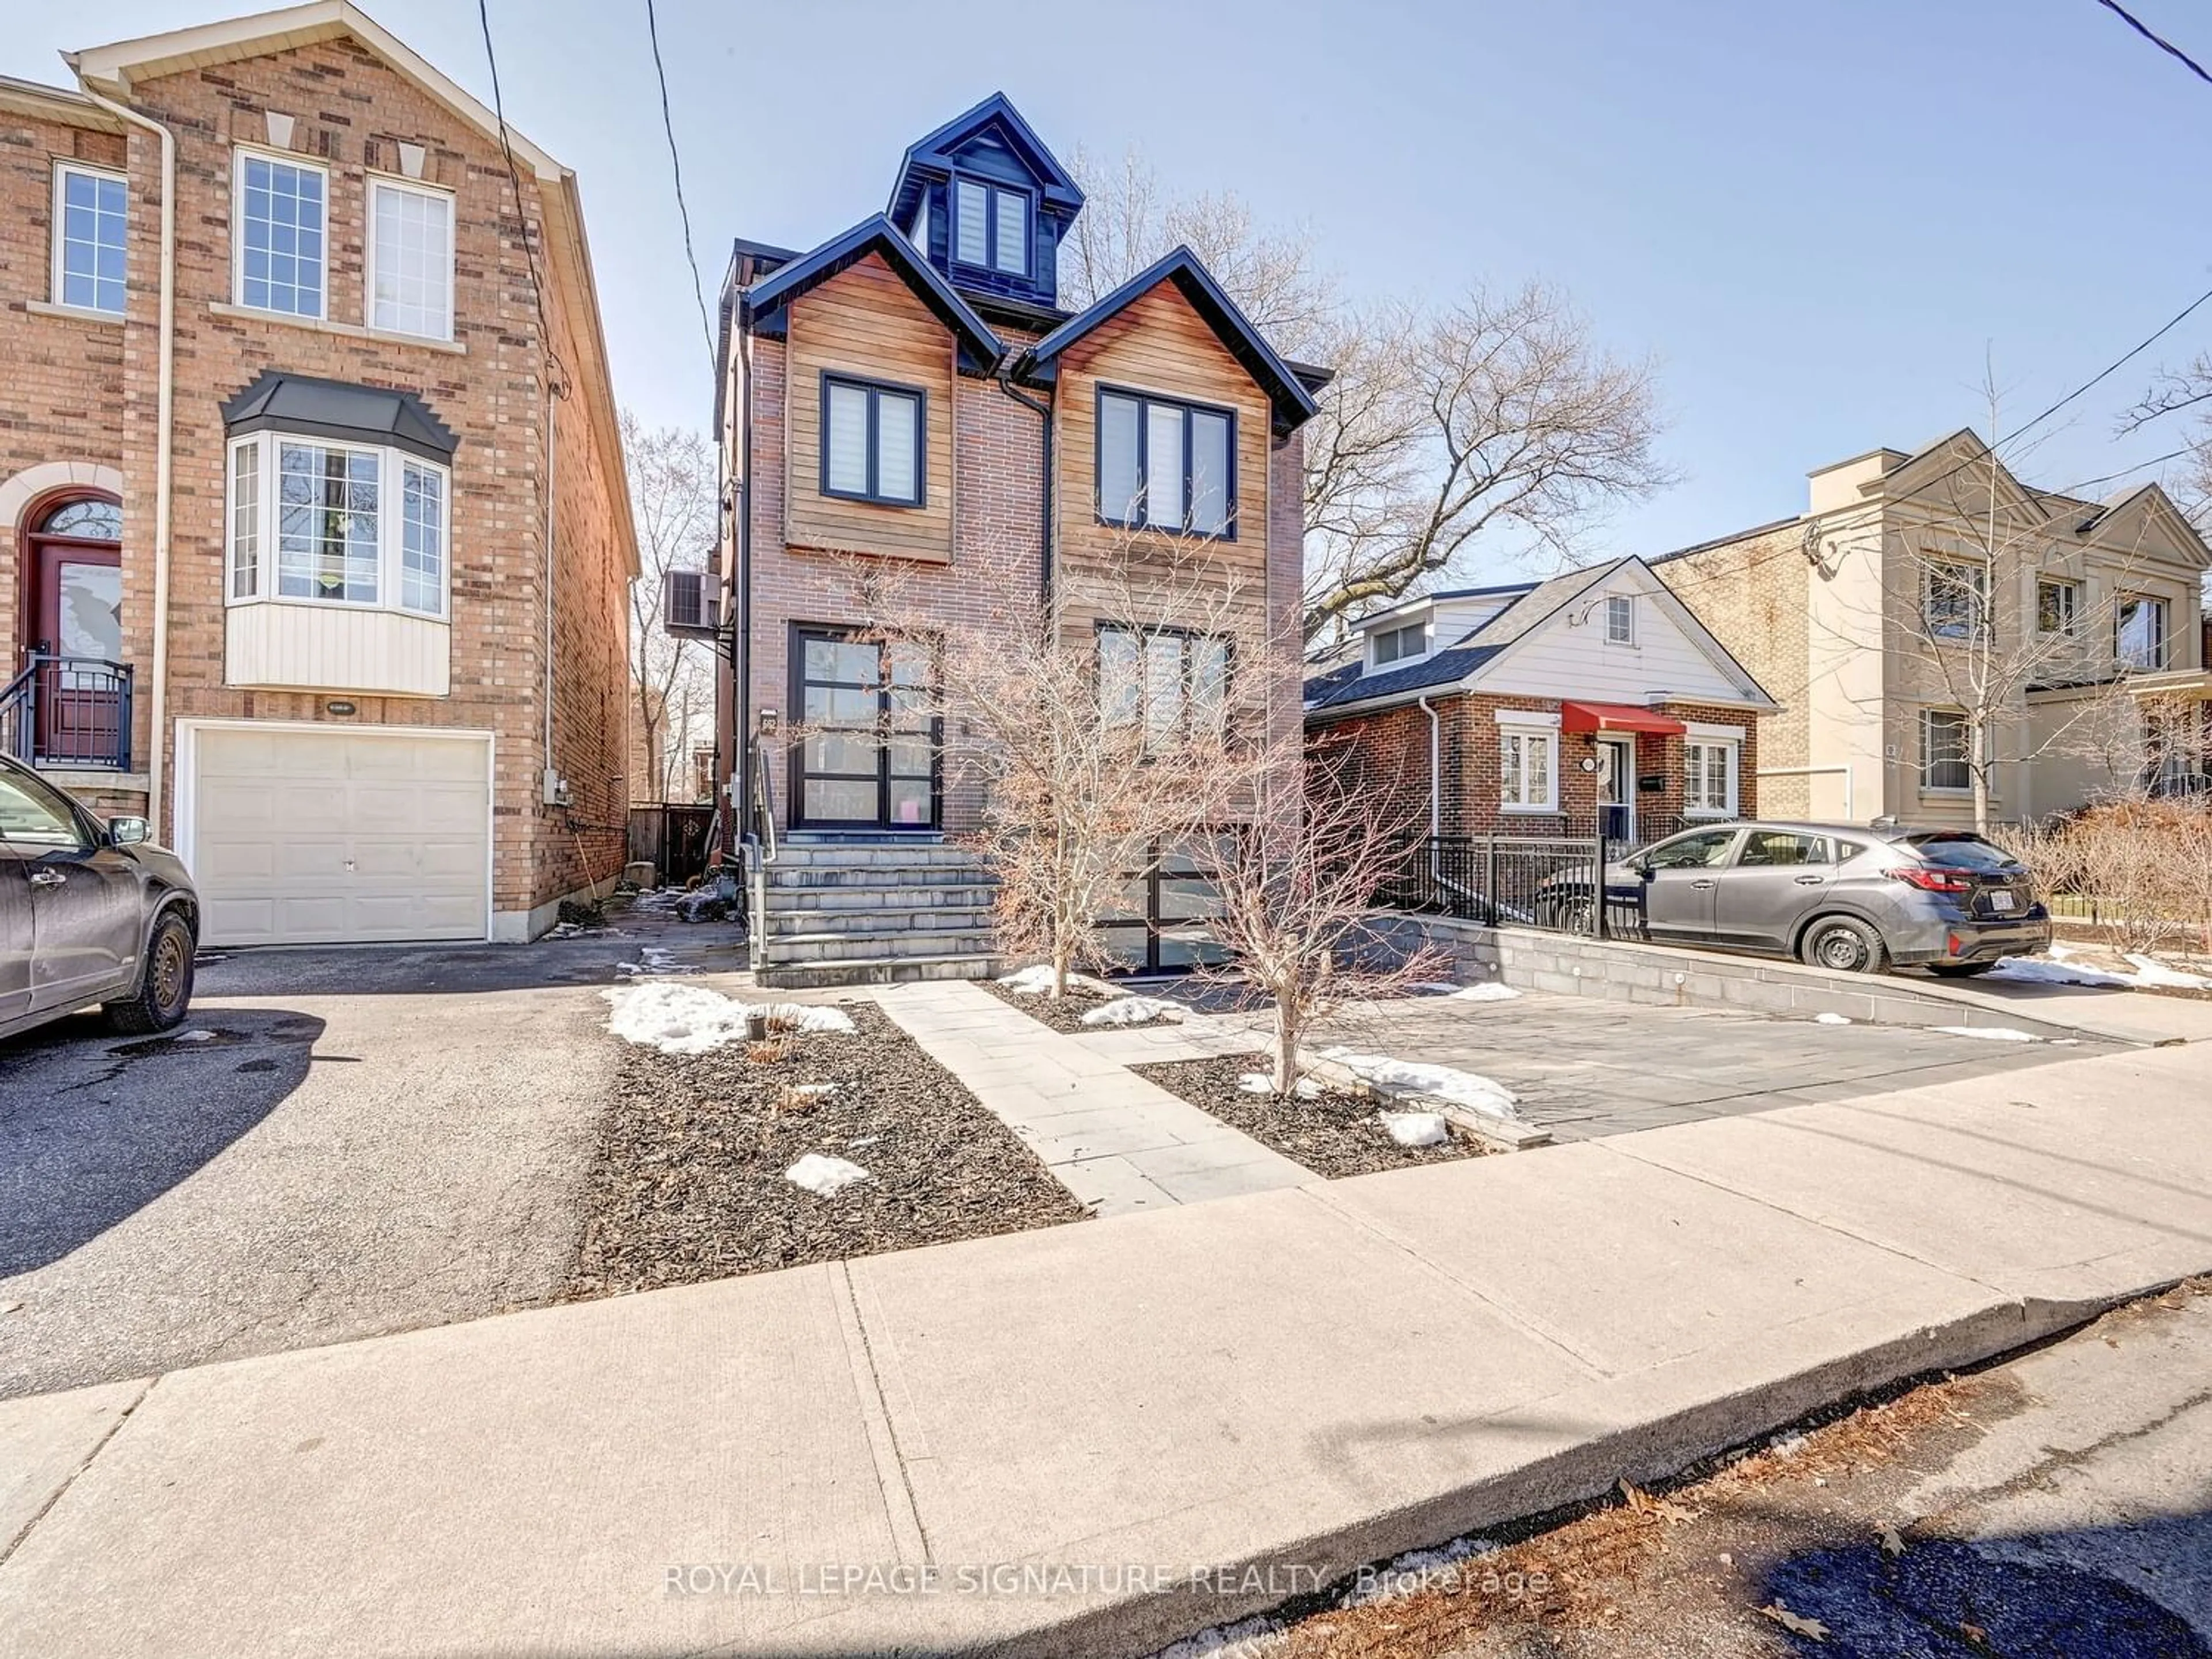 Frontside or backside of a home for 662 Willard Ave, Toronto Ontario M6S 3S5